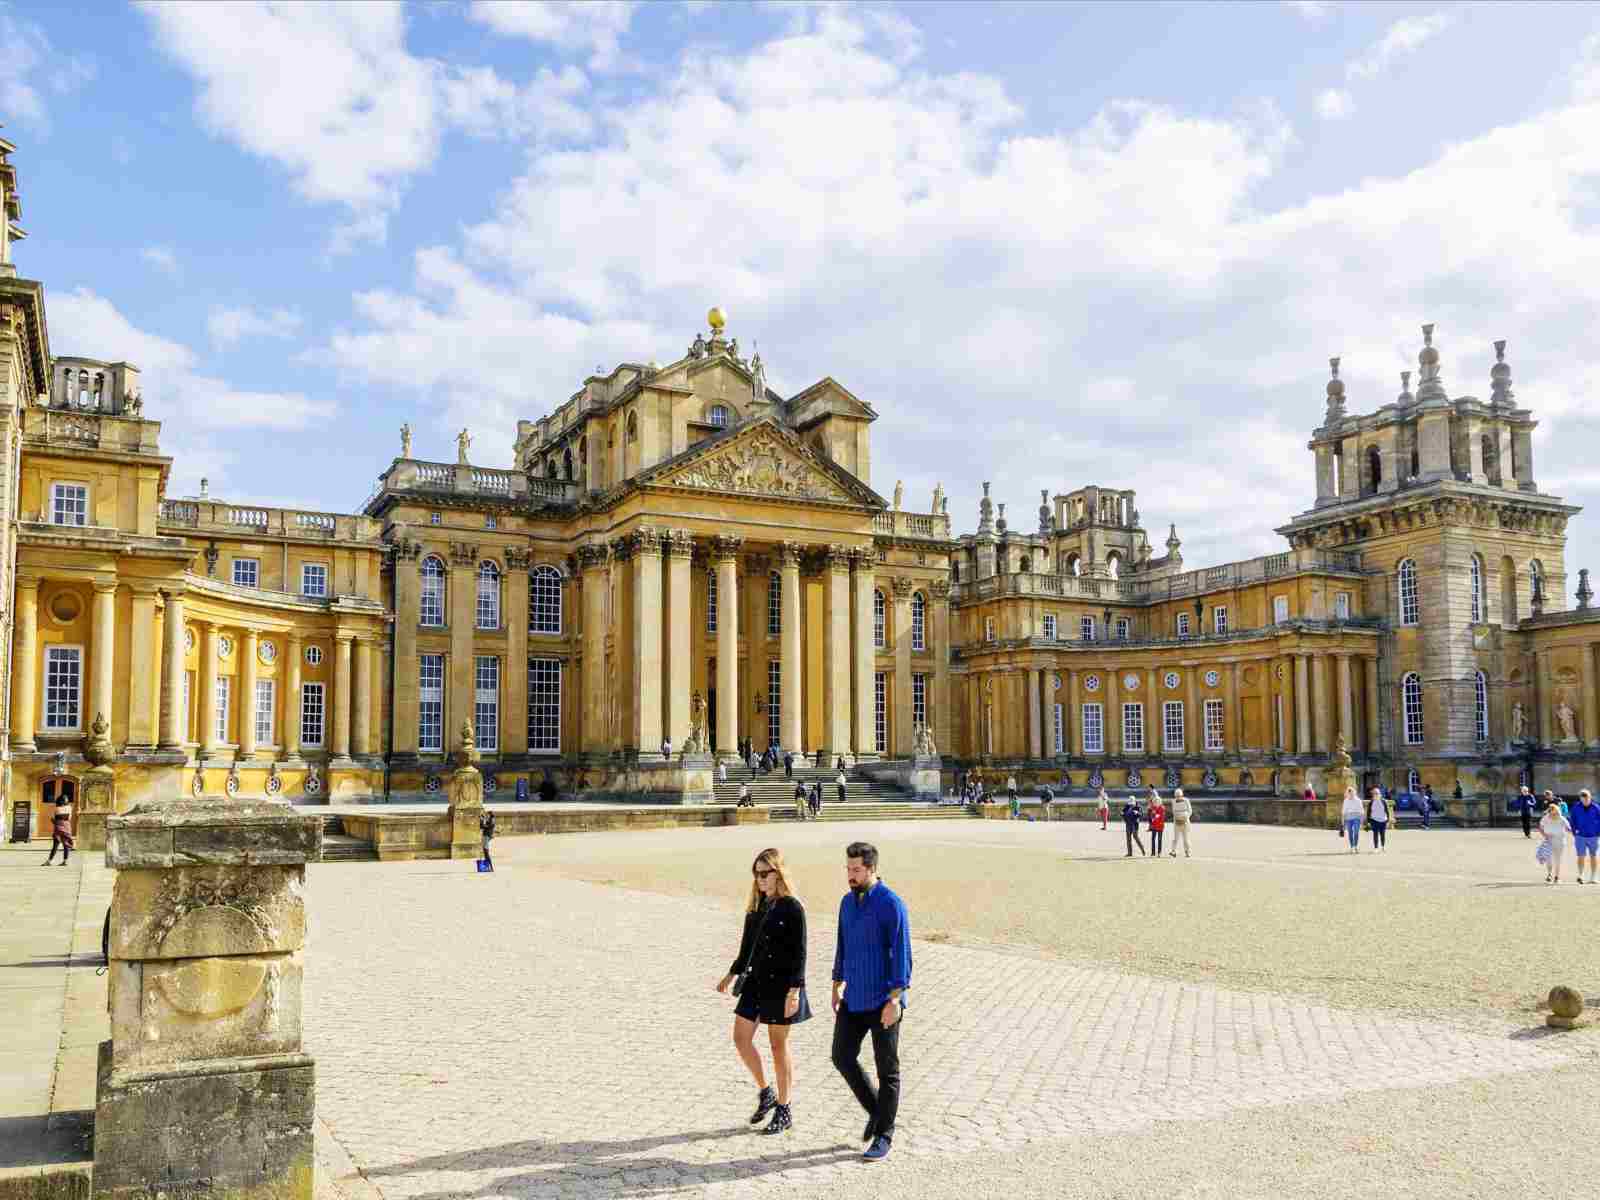 blenheim castle tour from oxford